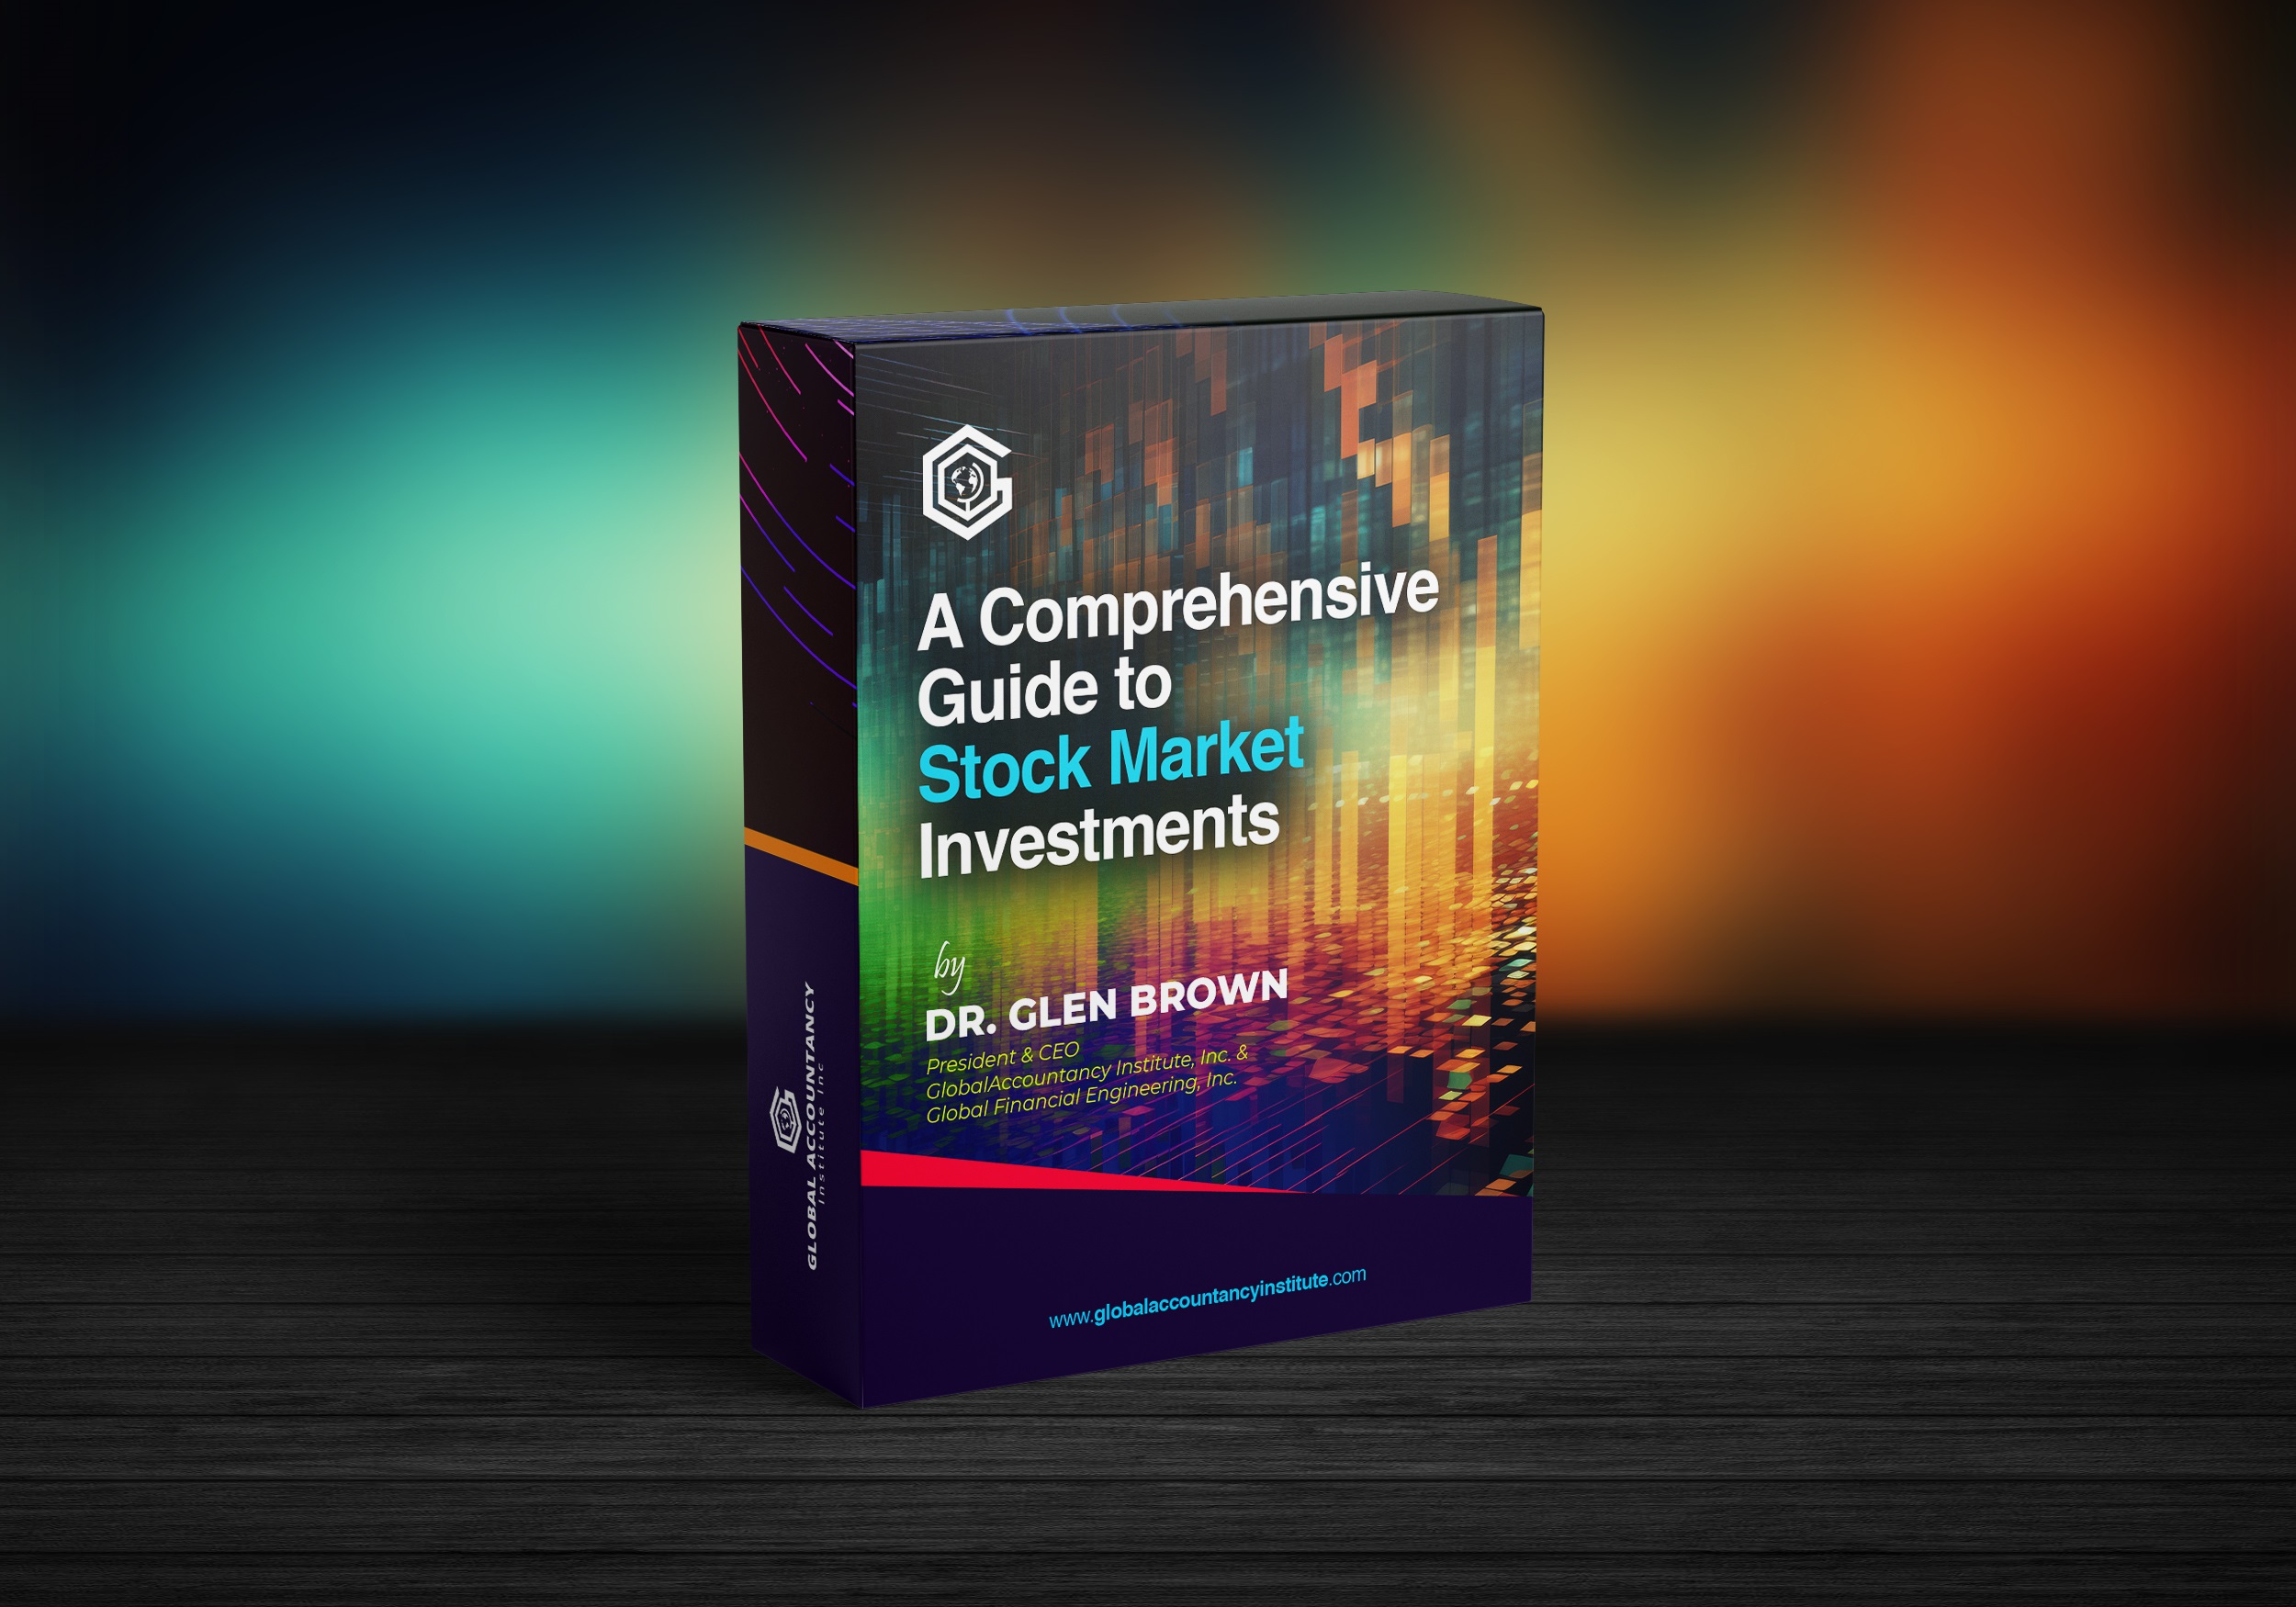 A Comprehensive Guide to Stock Market Investments